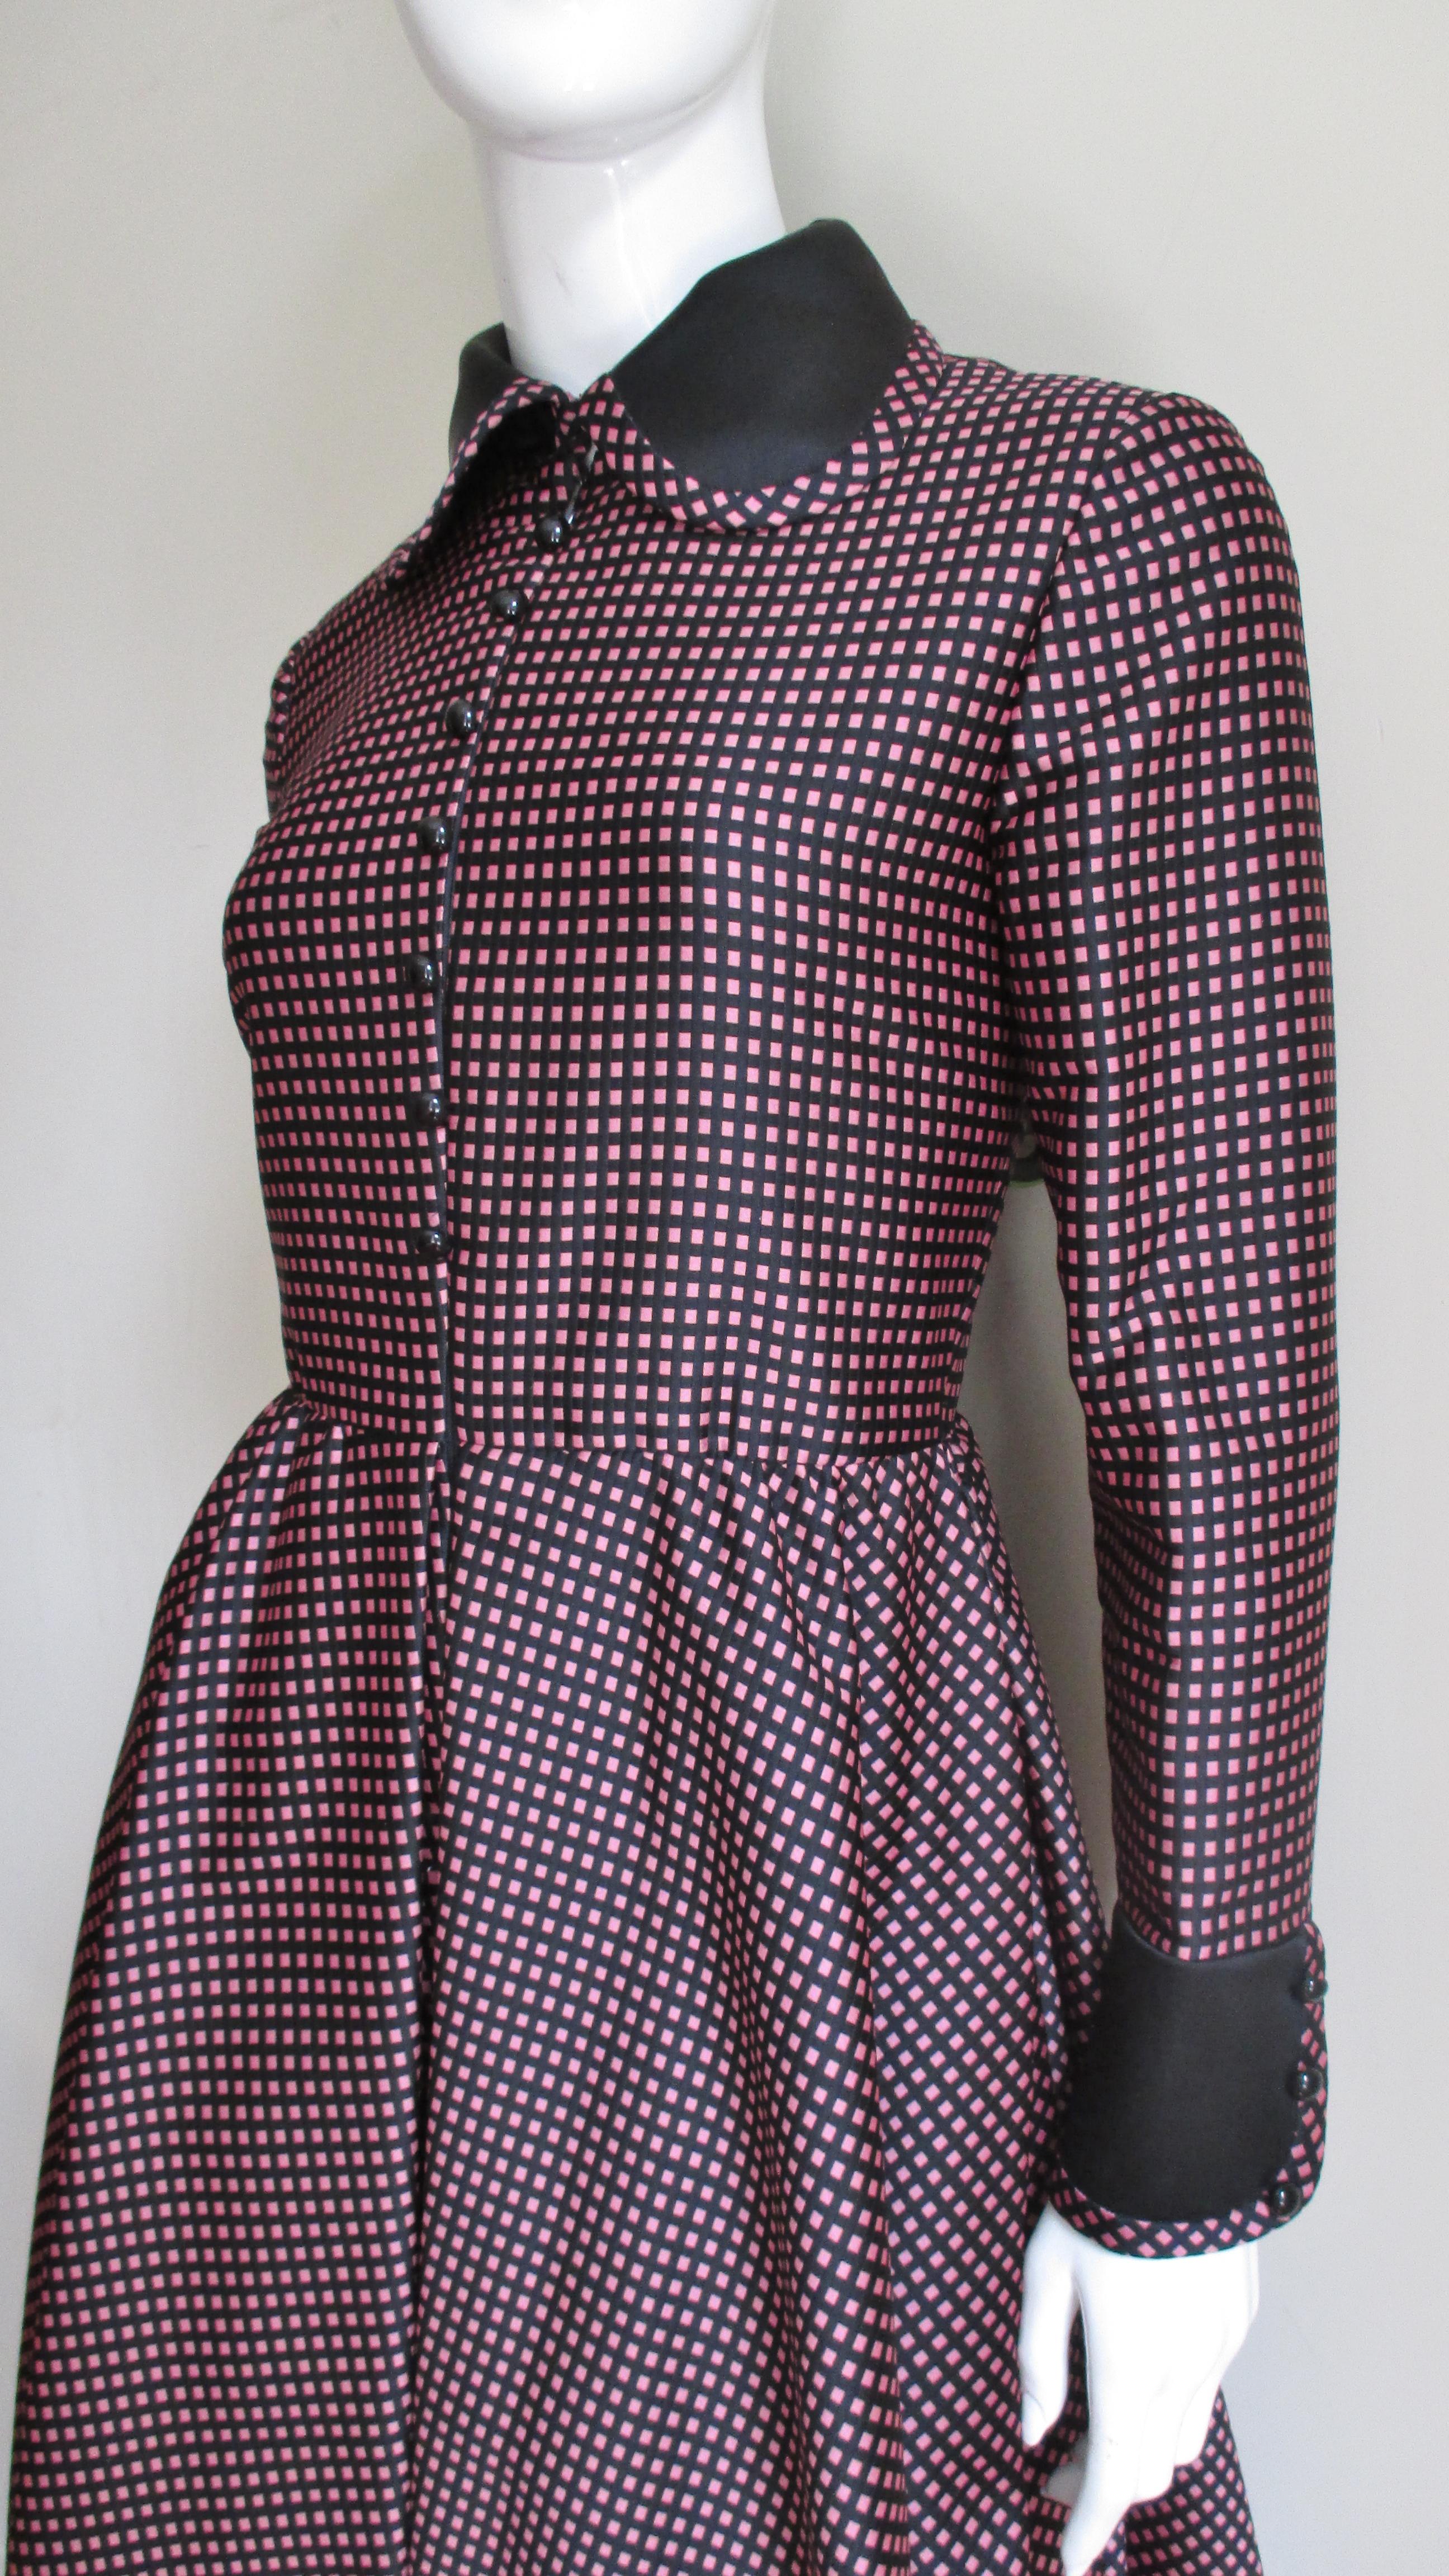 A charming silk dress in a pink/black check from Geoffrey Beene. It has a black Peter pan collar, side seam pockets, black button cuffs on long sleeves and round black decorative buttons up the front over a zipper closure. The bodice is fitted with